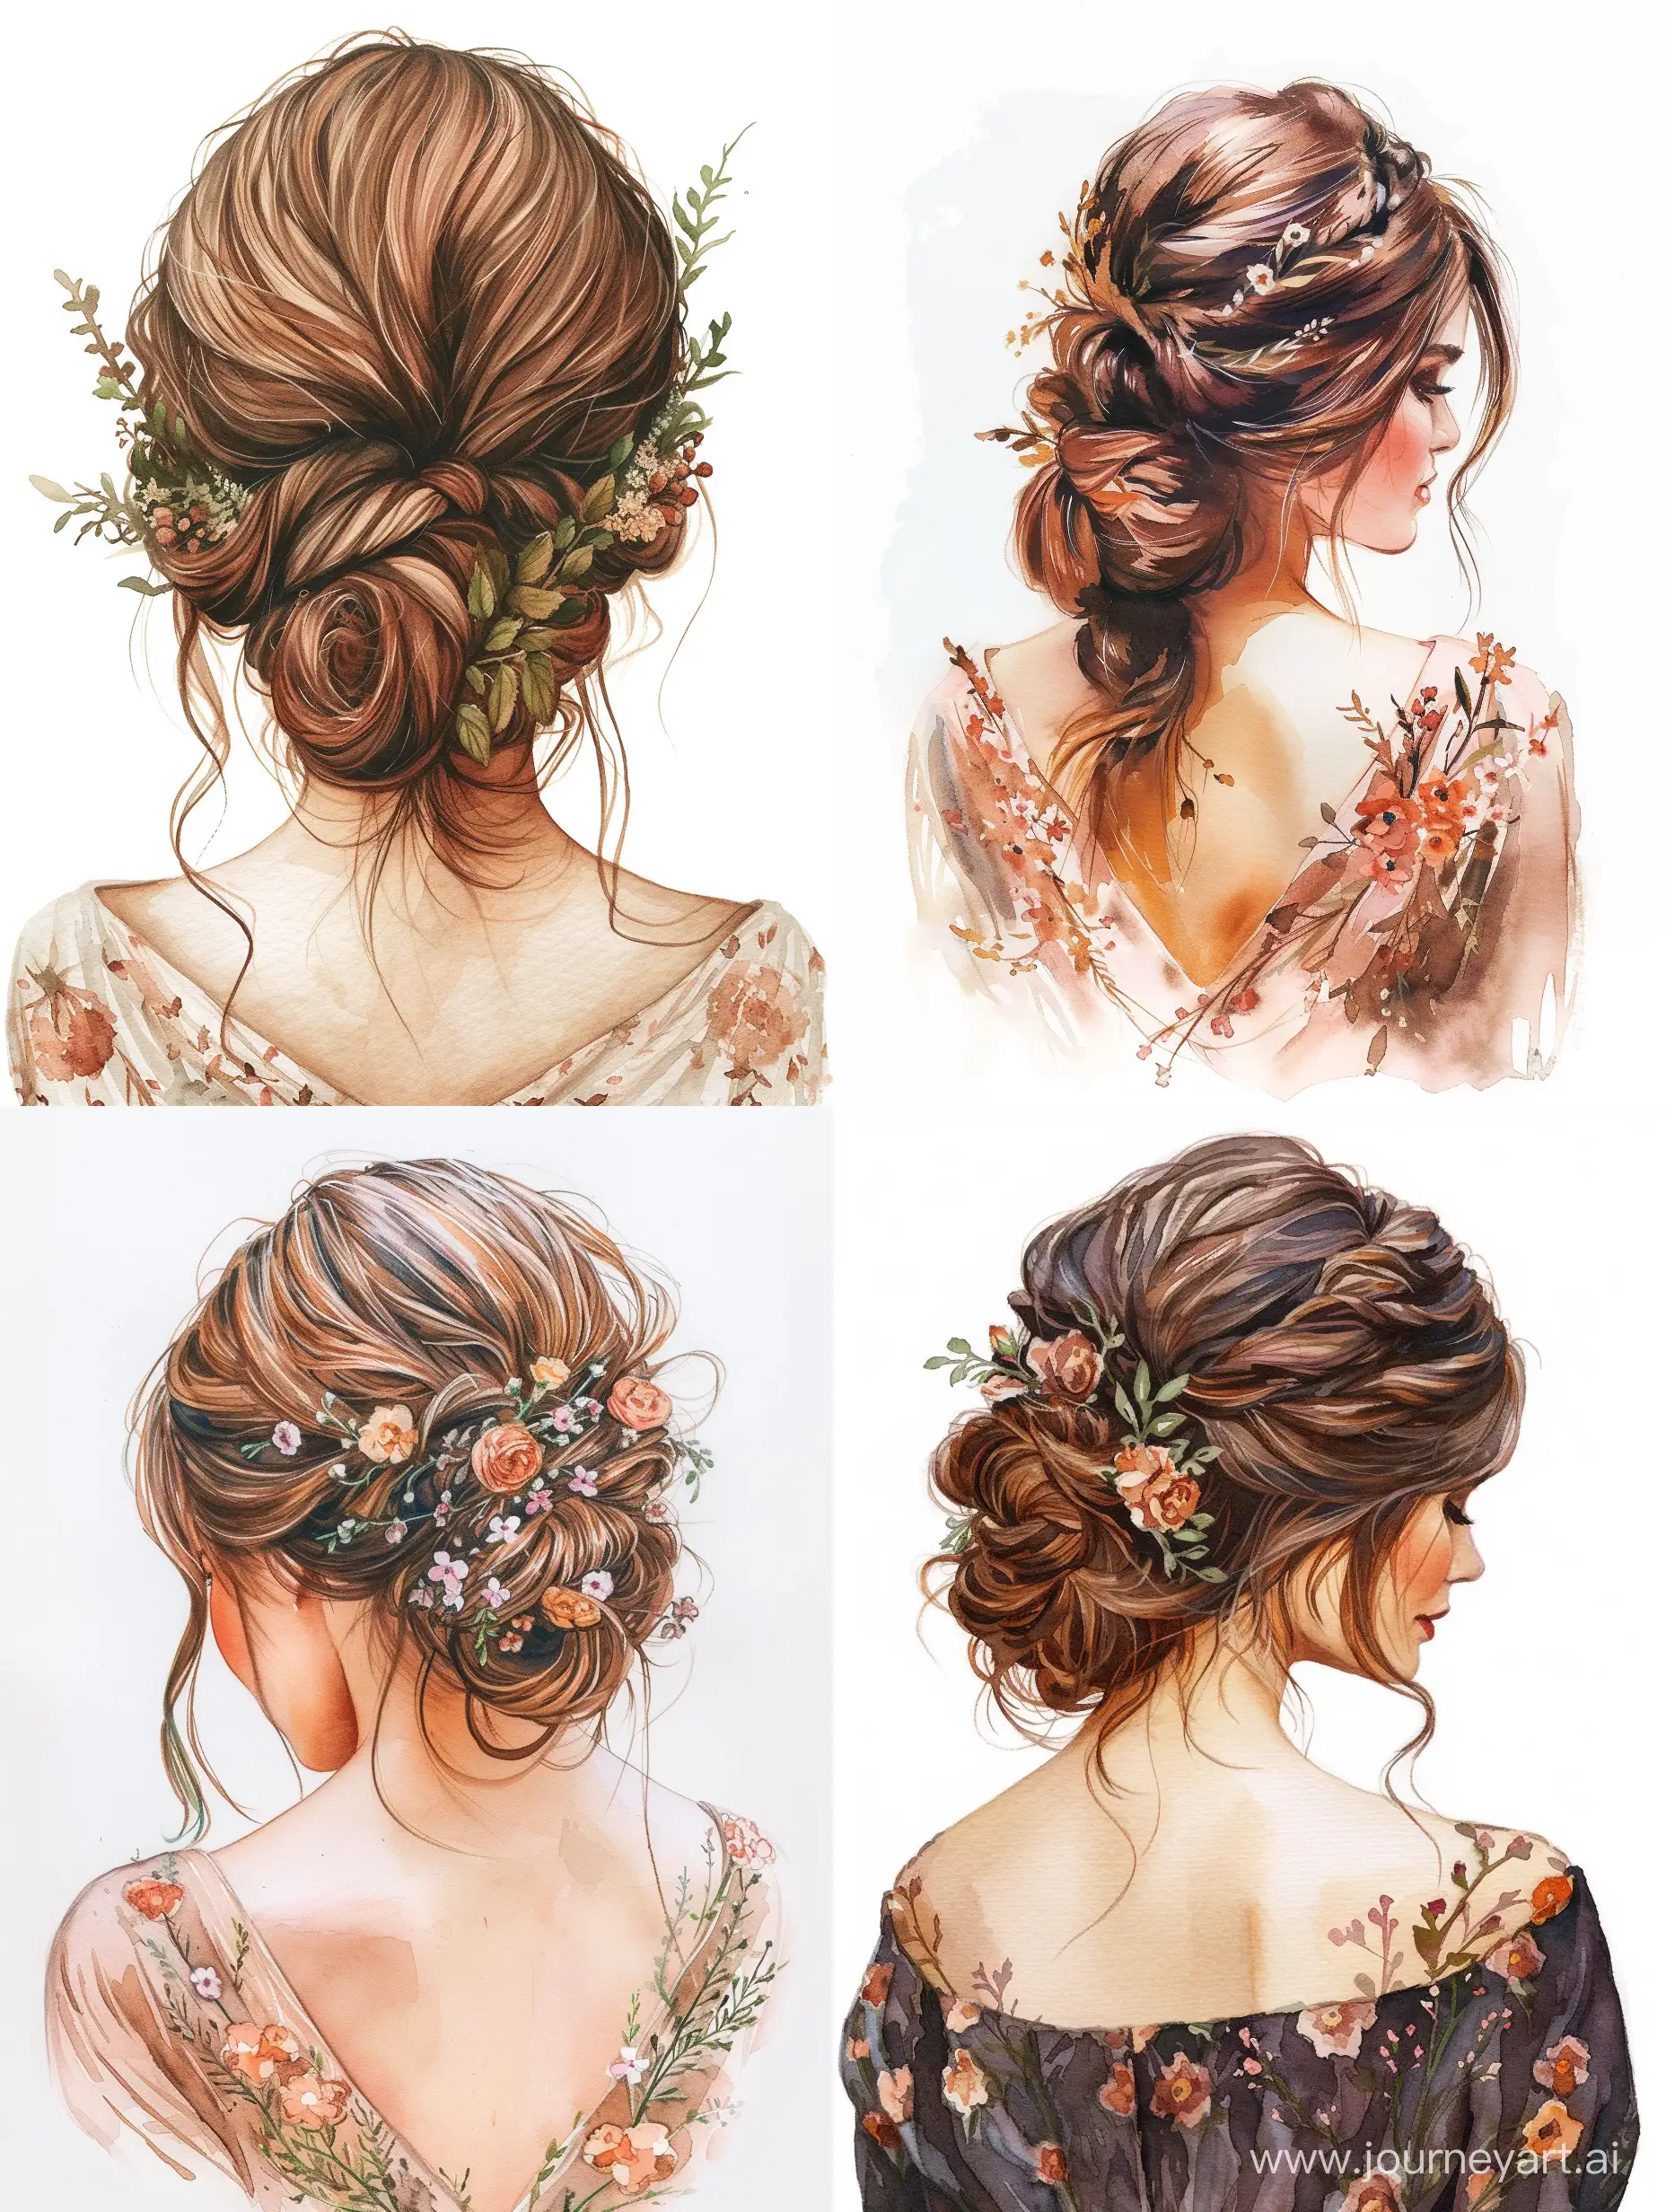 Watercolor-Portrait-of-Lady-with-Beautiful-Floral-Hairstyle-and-Tan-Skin